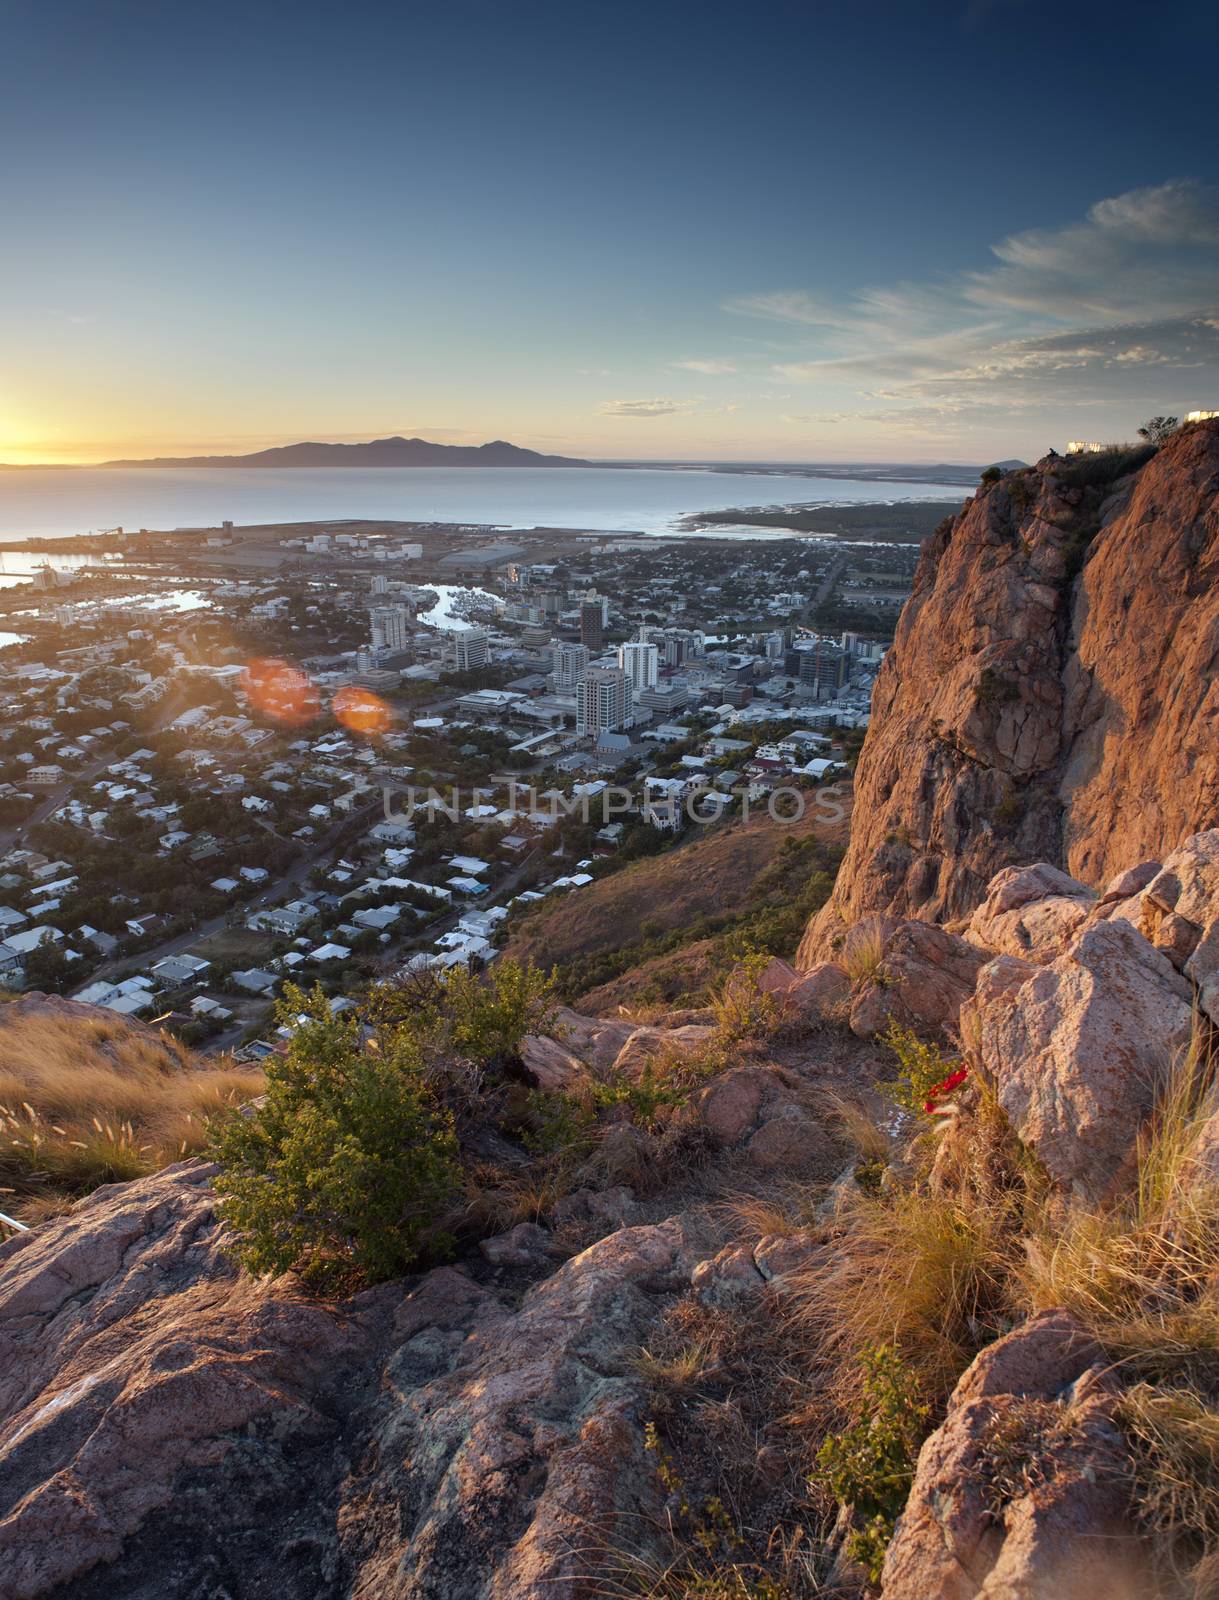 Overview of Townsville, Queensland,Australia by stockarch